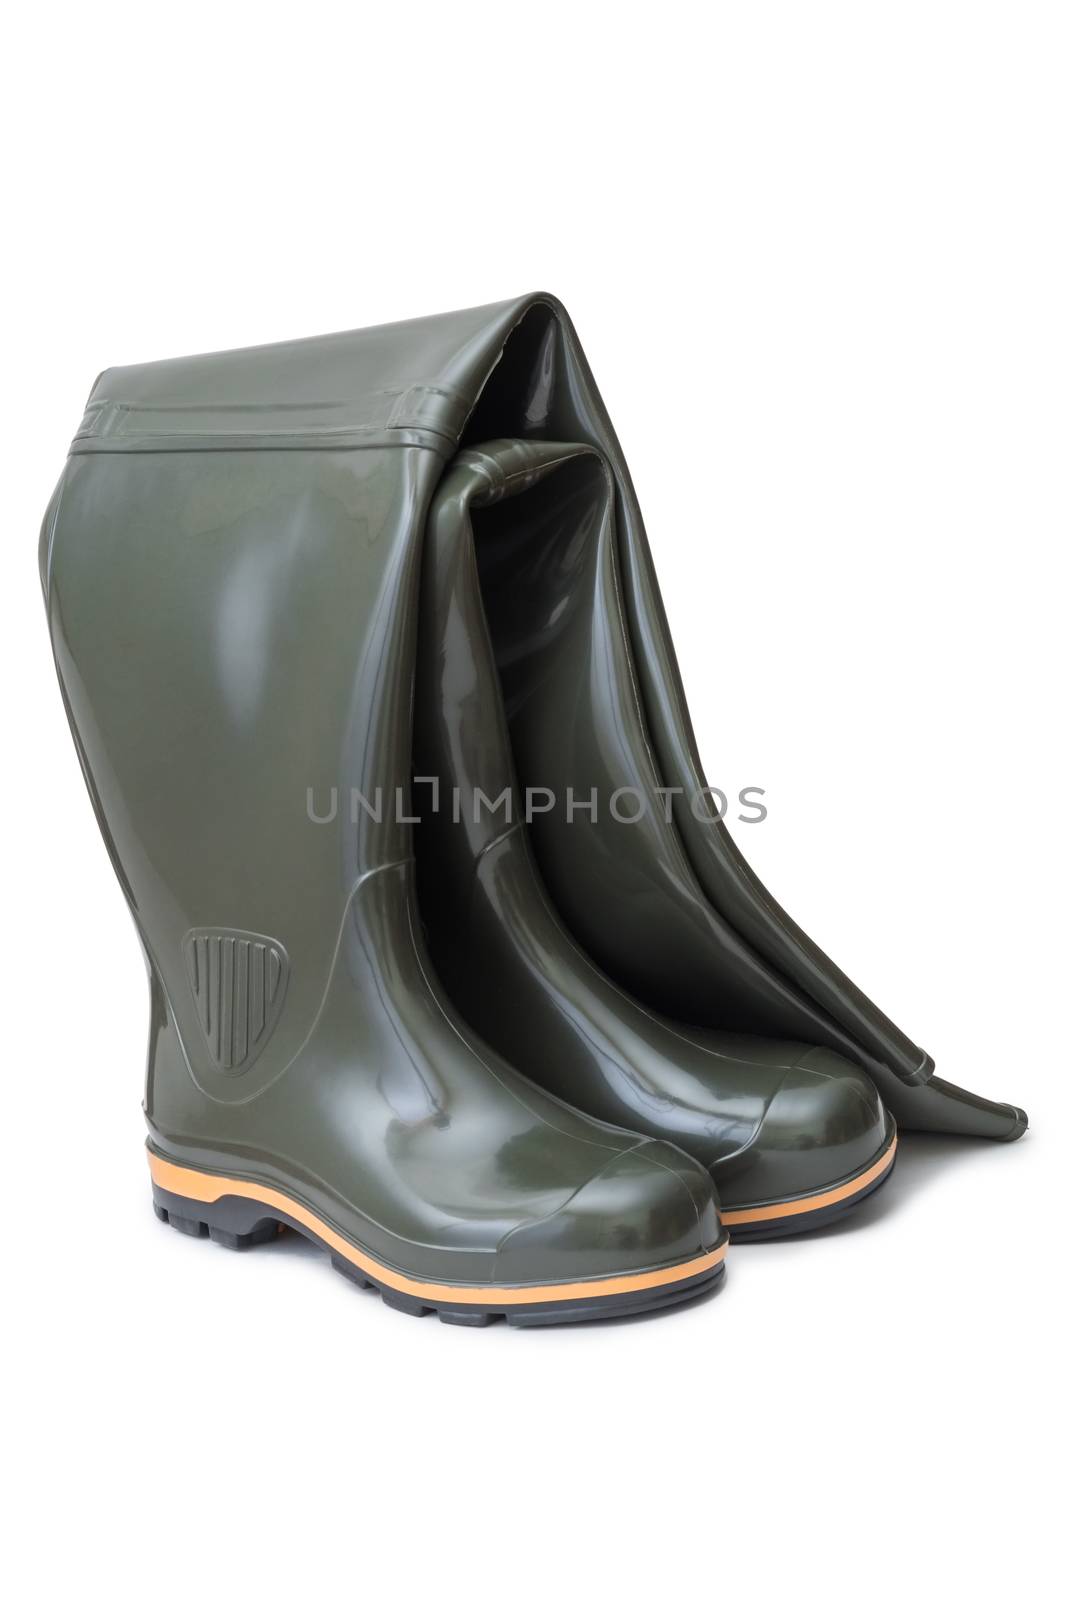 Rubber boots by Ohotnik